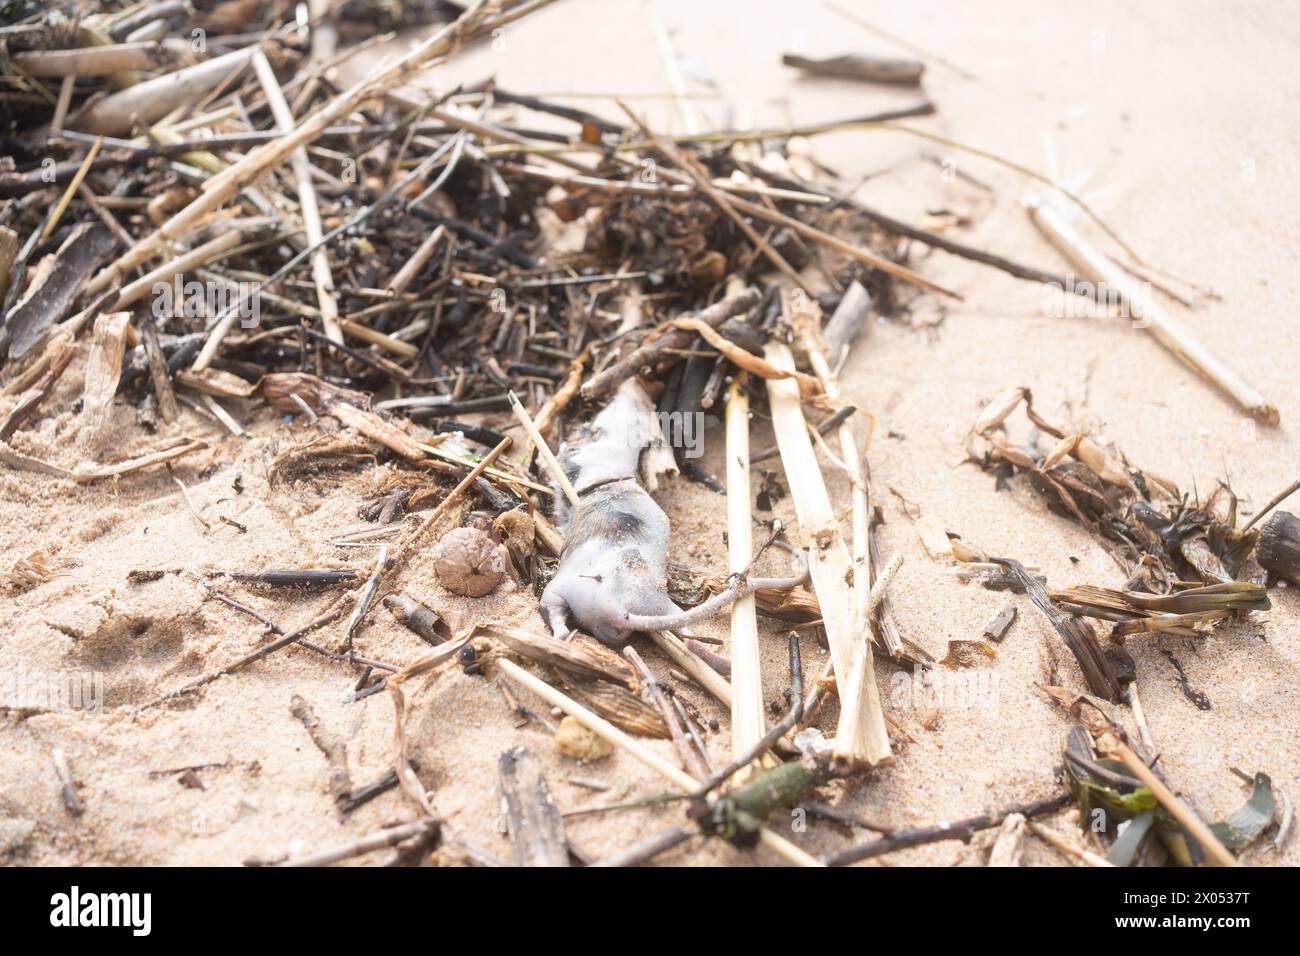 Close-up of deceased rat on sandy beach with flies, surrounded by beach litter, depicting environmental pollution. Dead rodent on sandy beach. Stock Photo